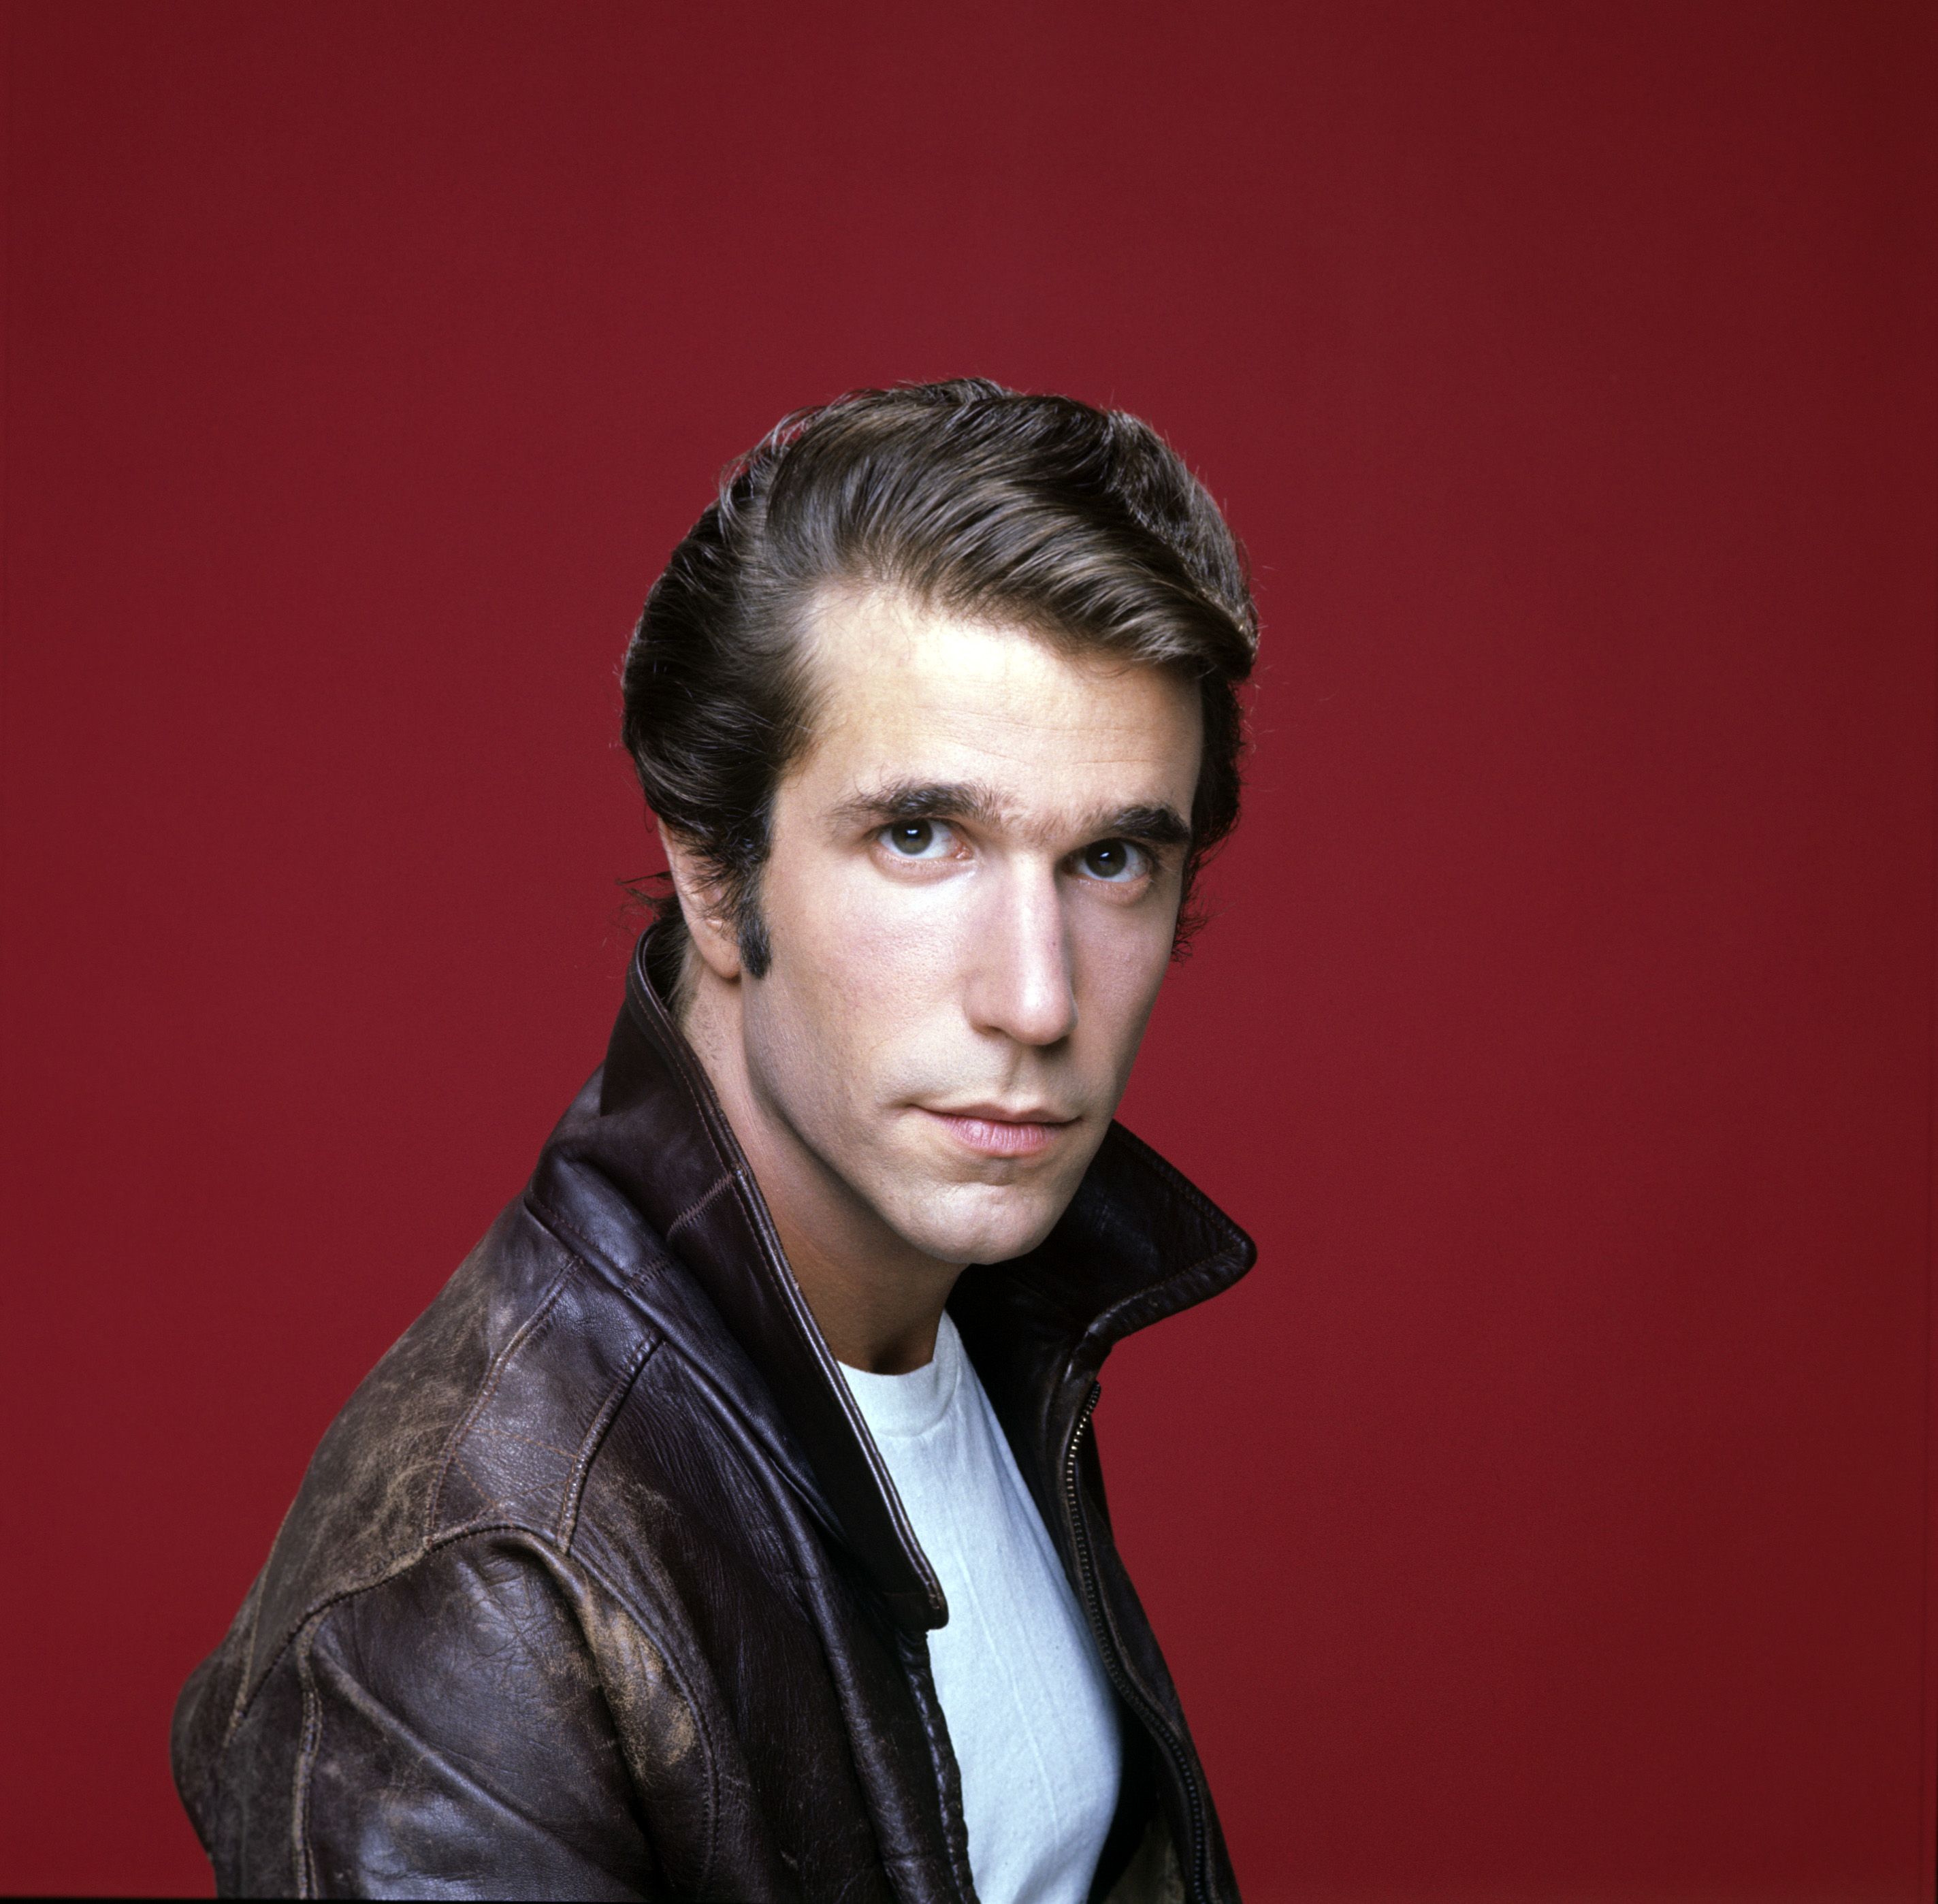 The Fonzie in front of a red background